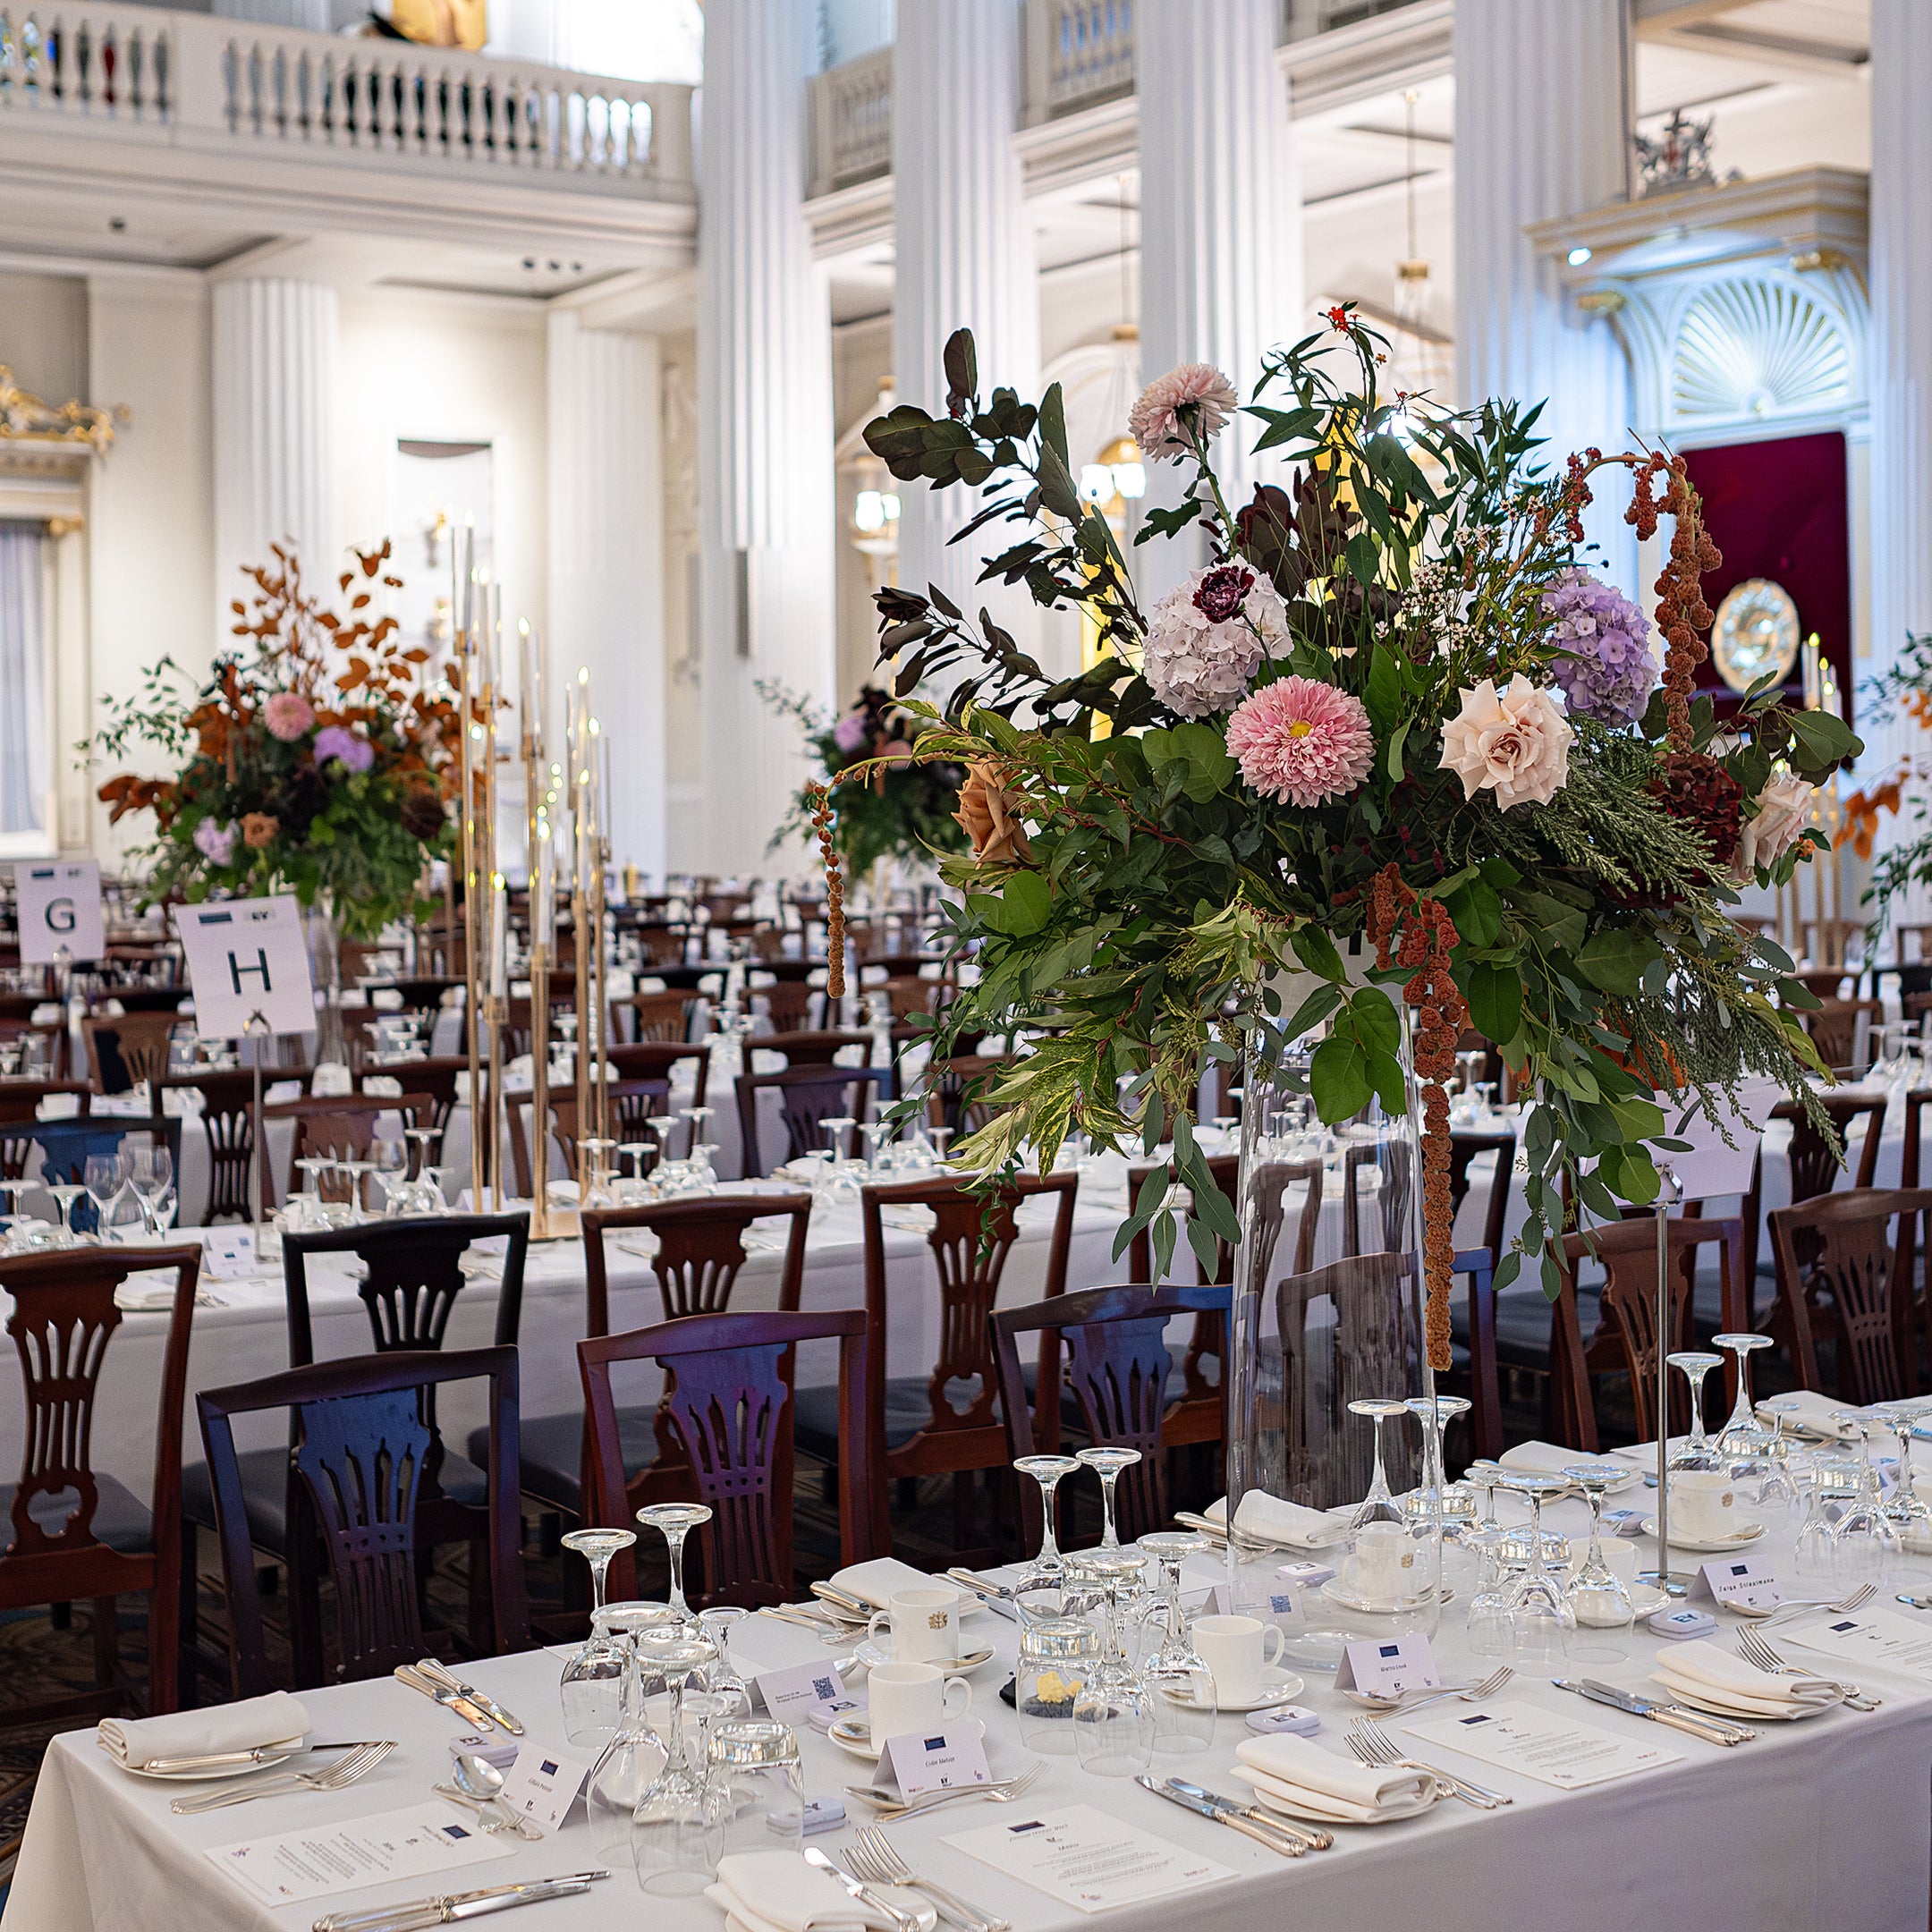 Bespoke arrangements in tall vases, made to captivate the elegantly of the decorated dining room